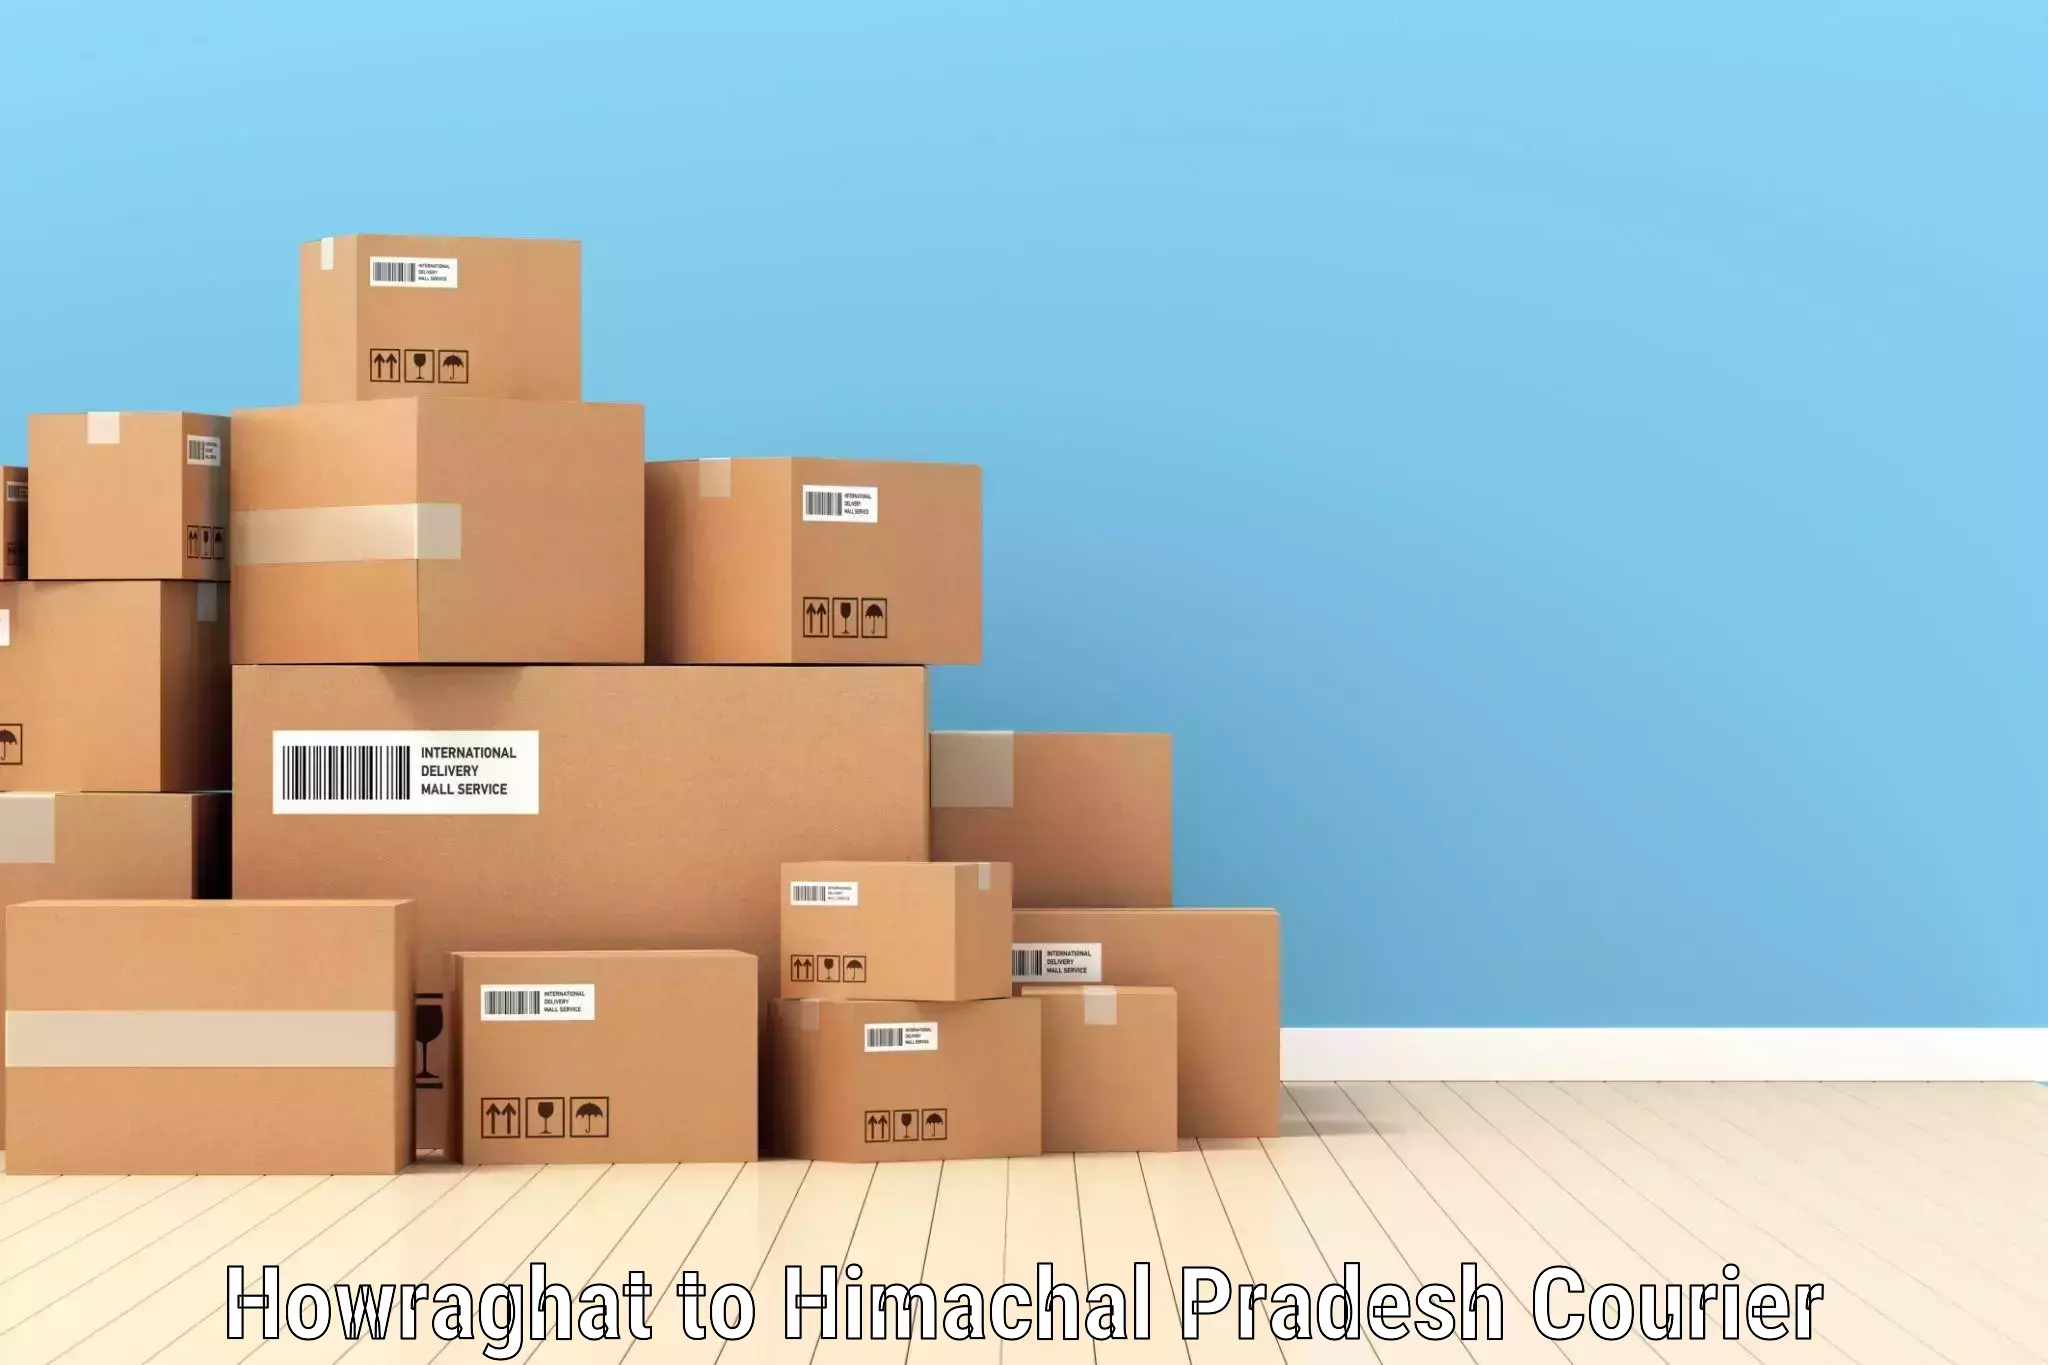 Fast shipping solutions Howraghat to Waknaghat